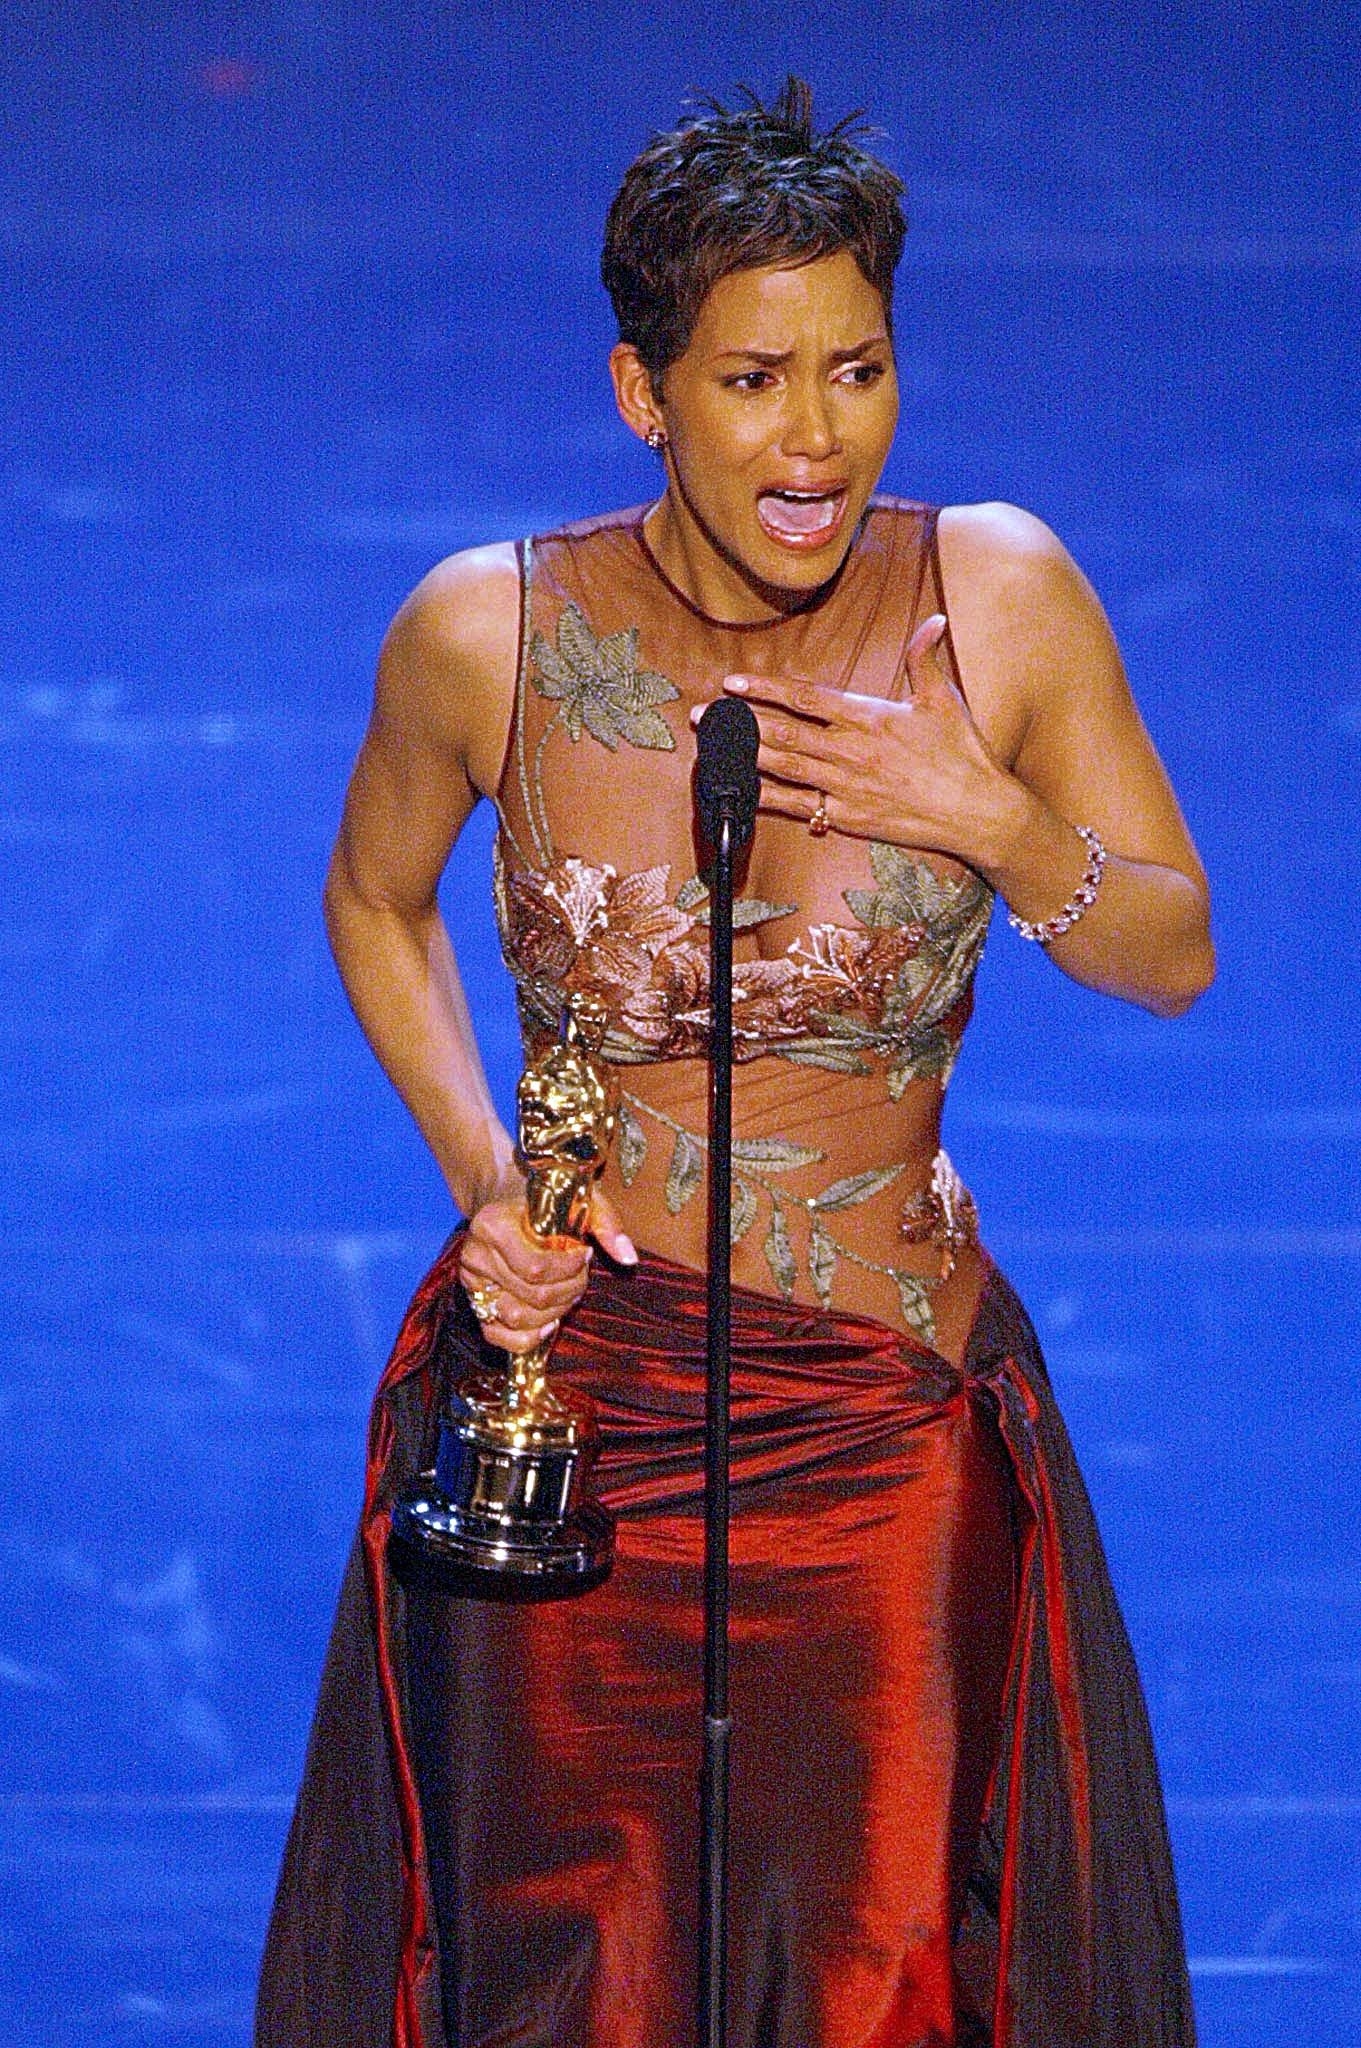 Halle Berry looks overwhelmed as she accepts her Best Actress Oscar